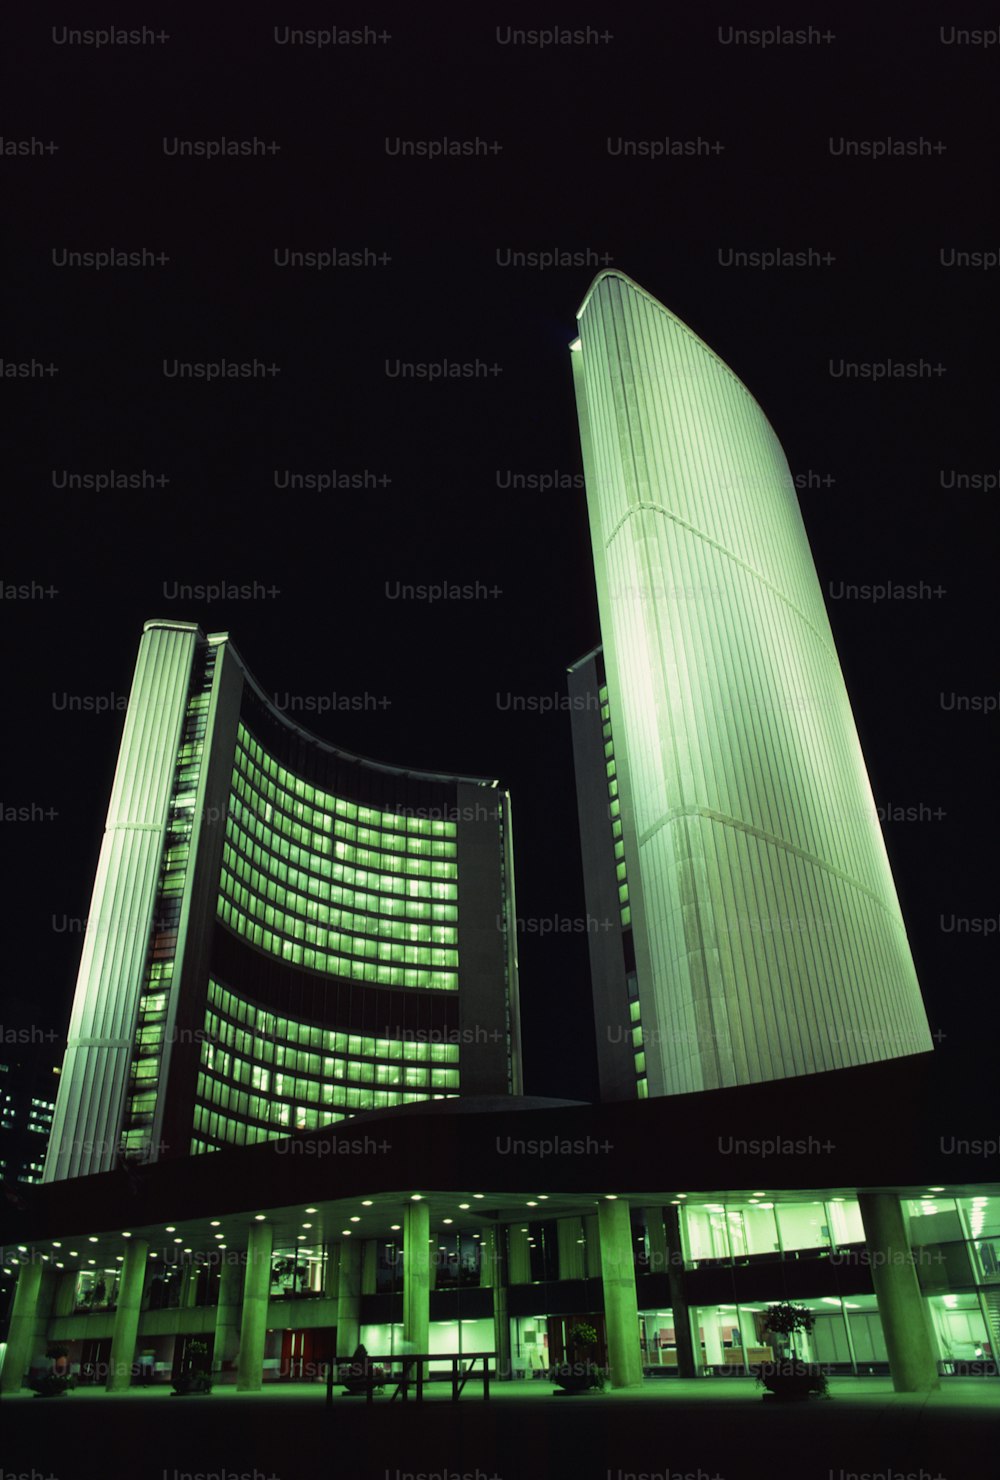 two tall buildings lit up at night in a city